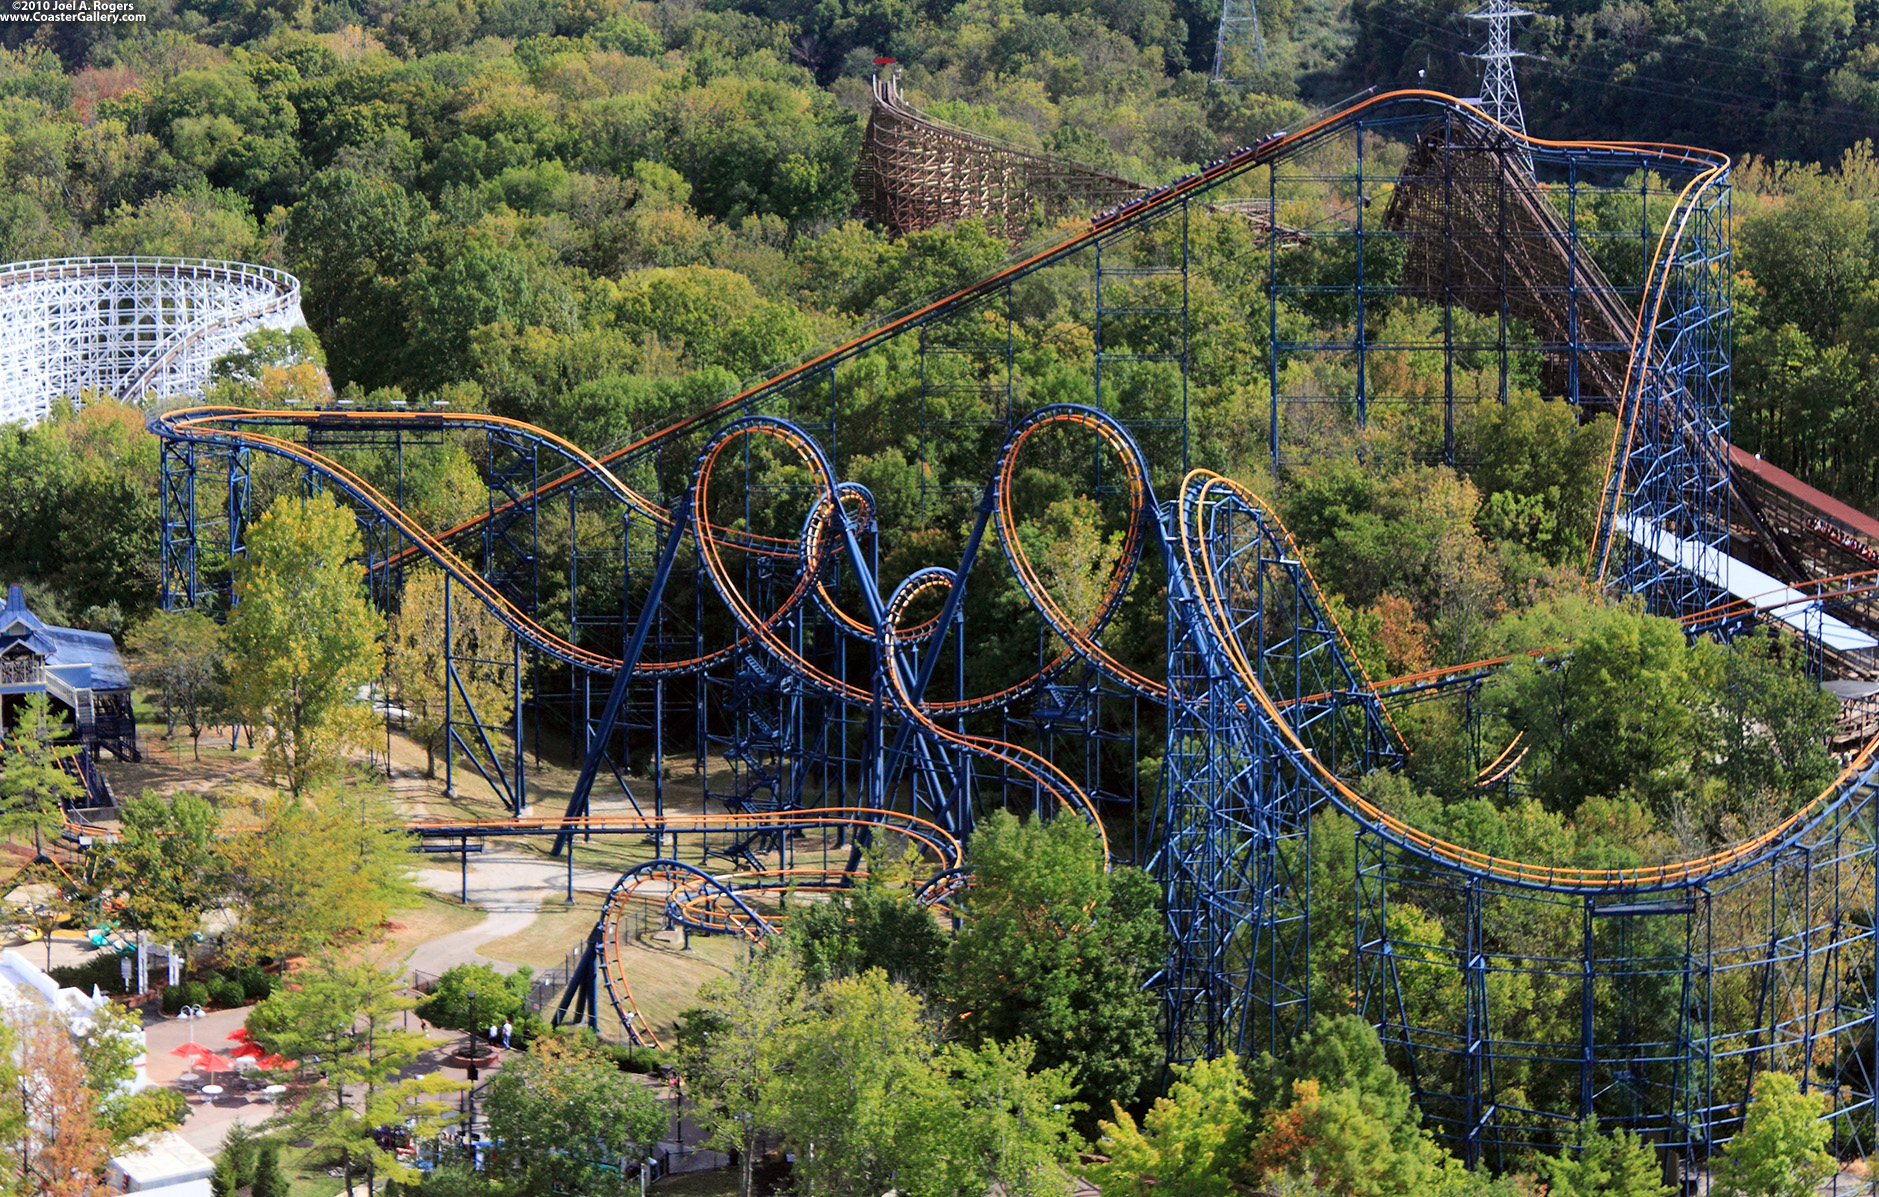 Aerial view of Beast and Vortex roller coasters